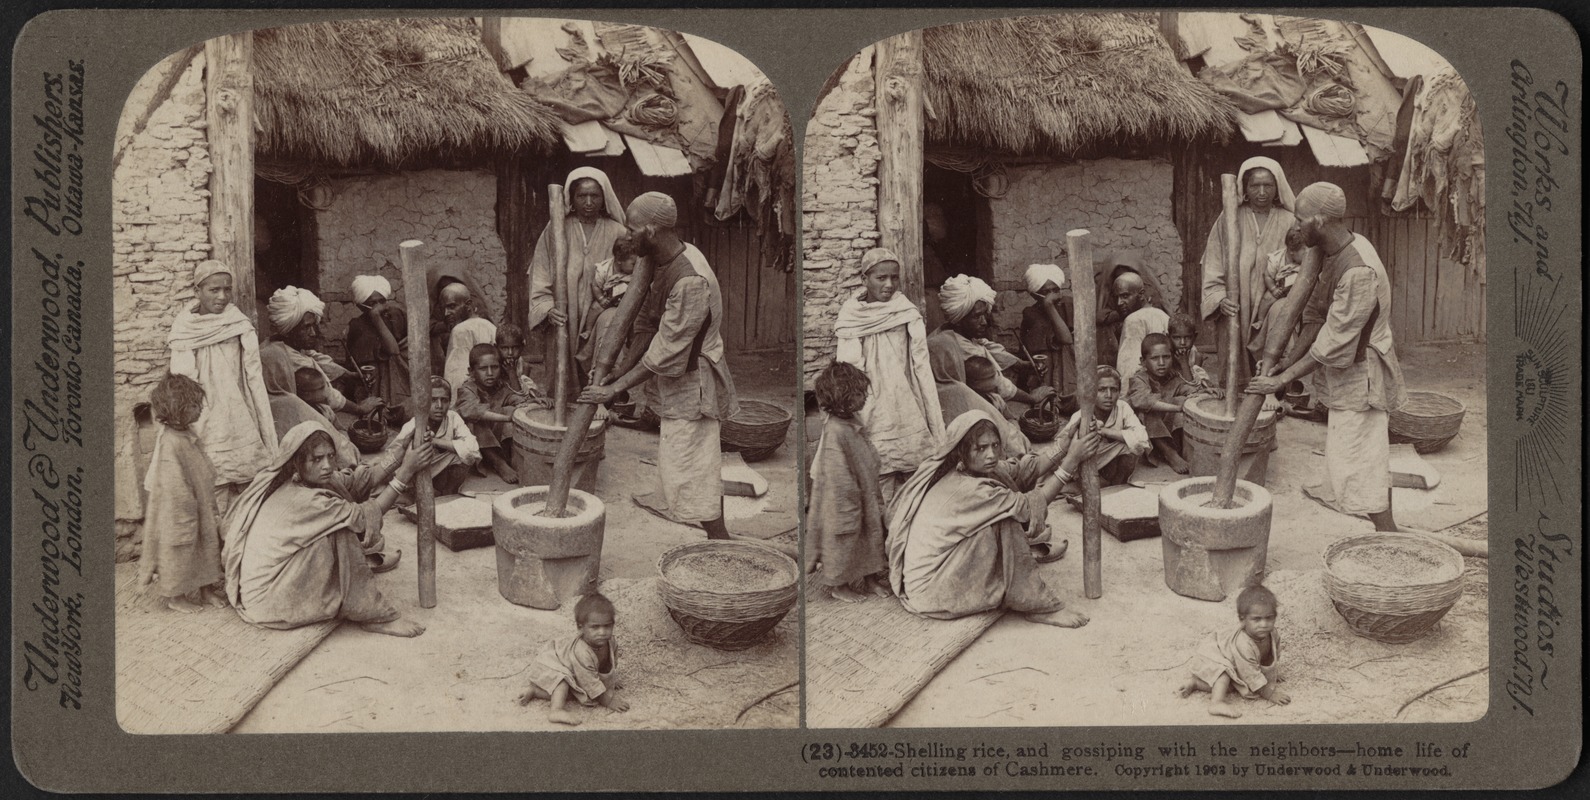 Shelling rice and gossipping with neighbors, Cashmere, India